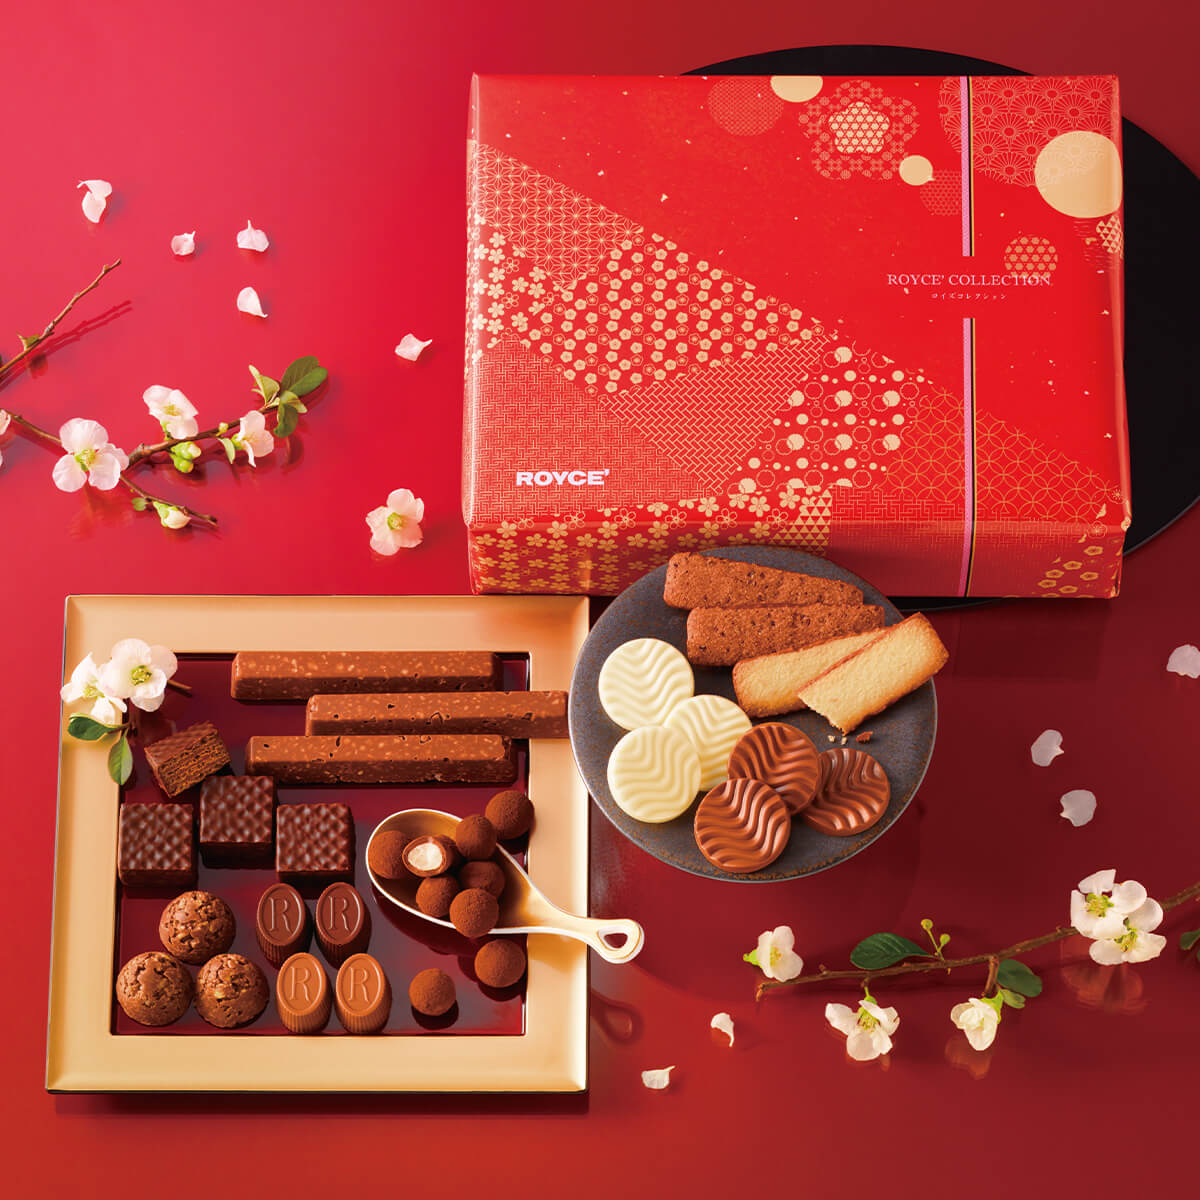 ROYCE' Chocolate - Image shows a red printed box on the right with text saying ROYCE' Collection ROYCE'. Lower left side shows chocolates of different shapes in square- and circle- shaped plates. Accents include flowers. Background is in red.